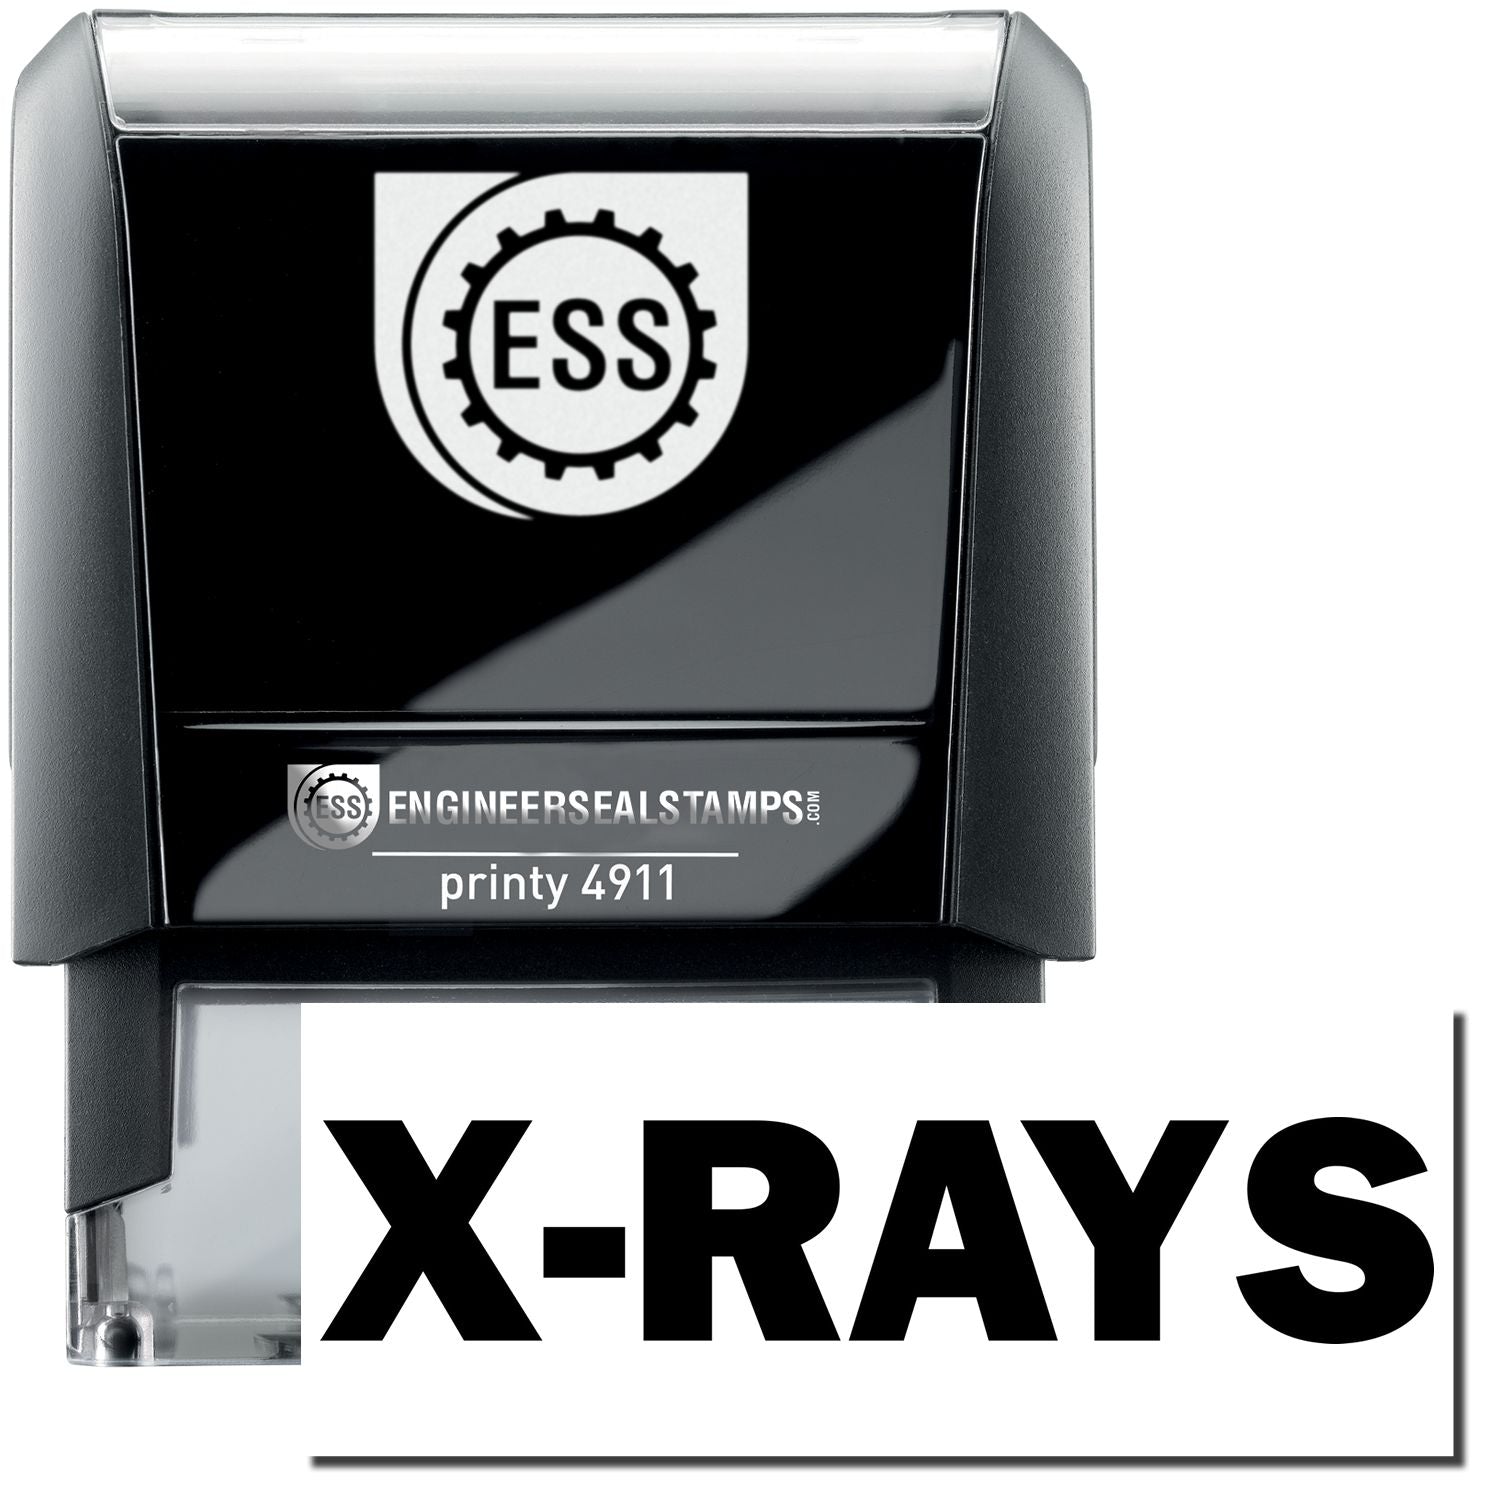 A self-inking stamp with a stamped image showing how the text "X-RAYS" is displayed after stamping.